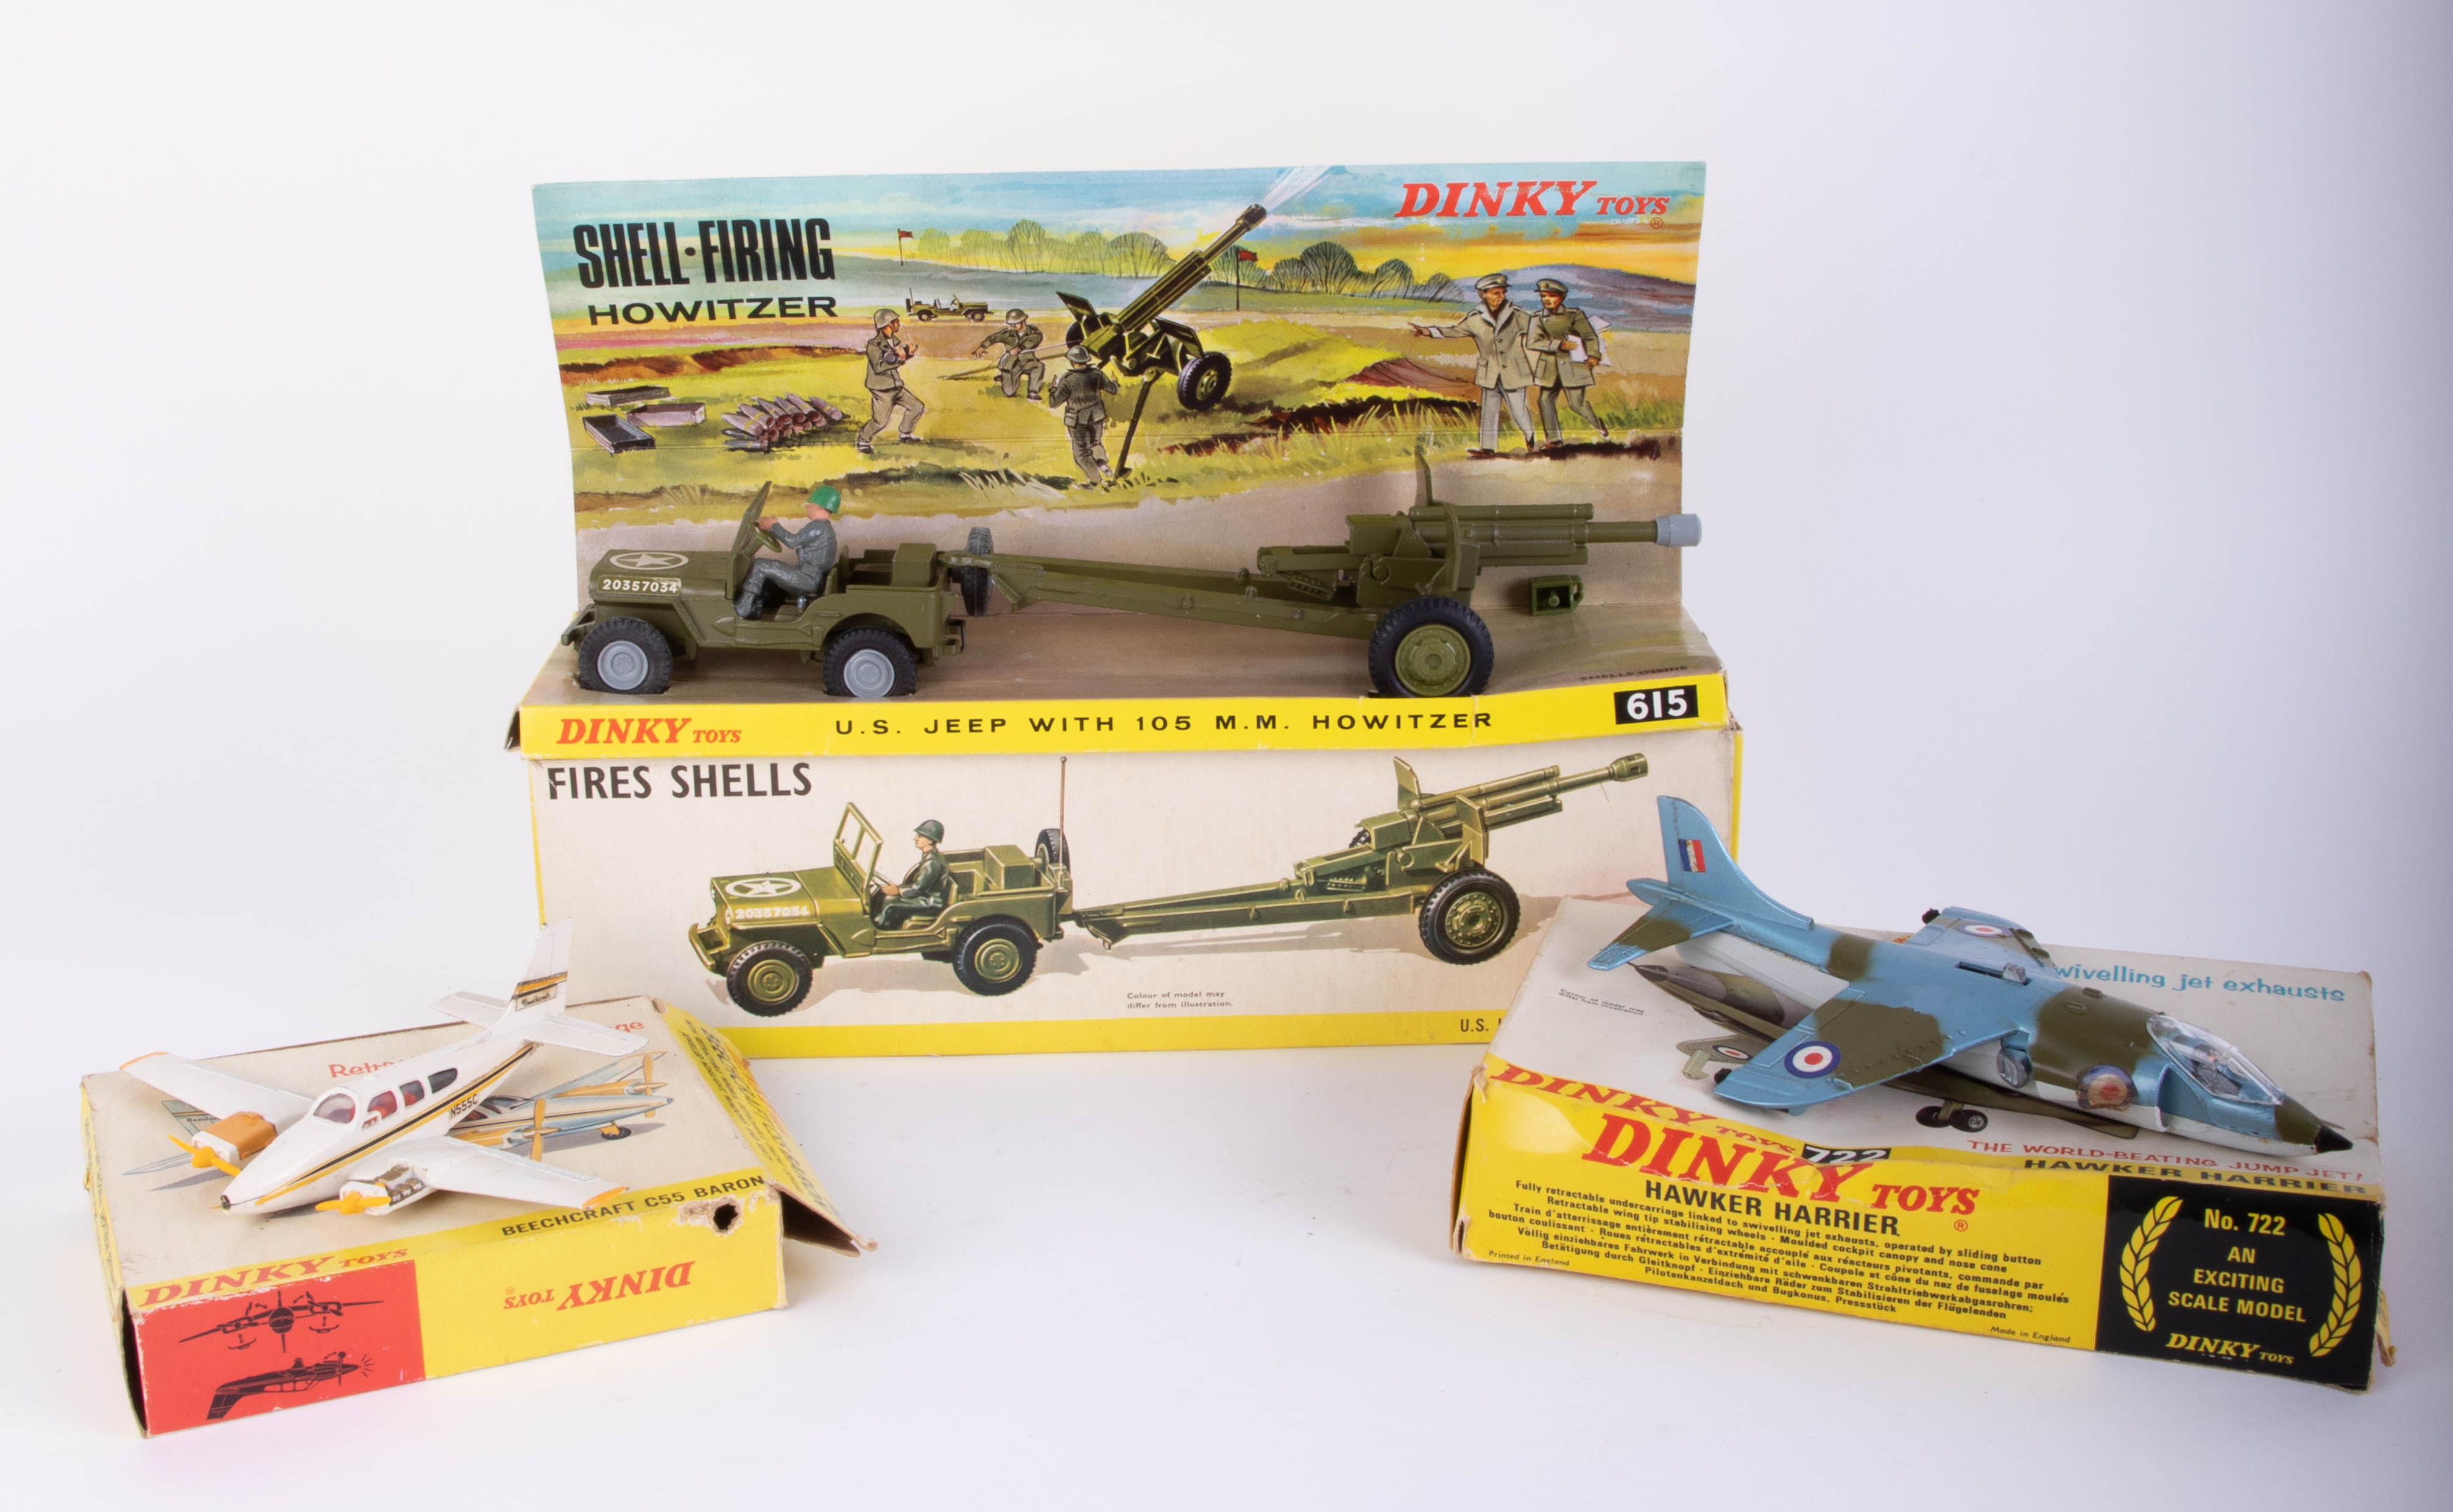 Dinky Toys, Hawker Harrier 722, US Jeep with Howitzer 615, Beechcraft Baron 715 (3).